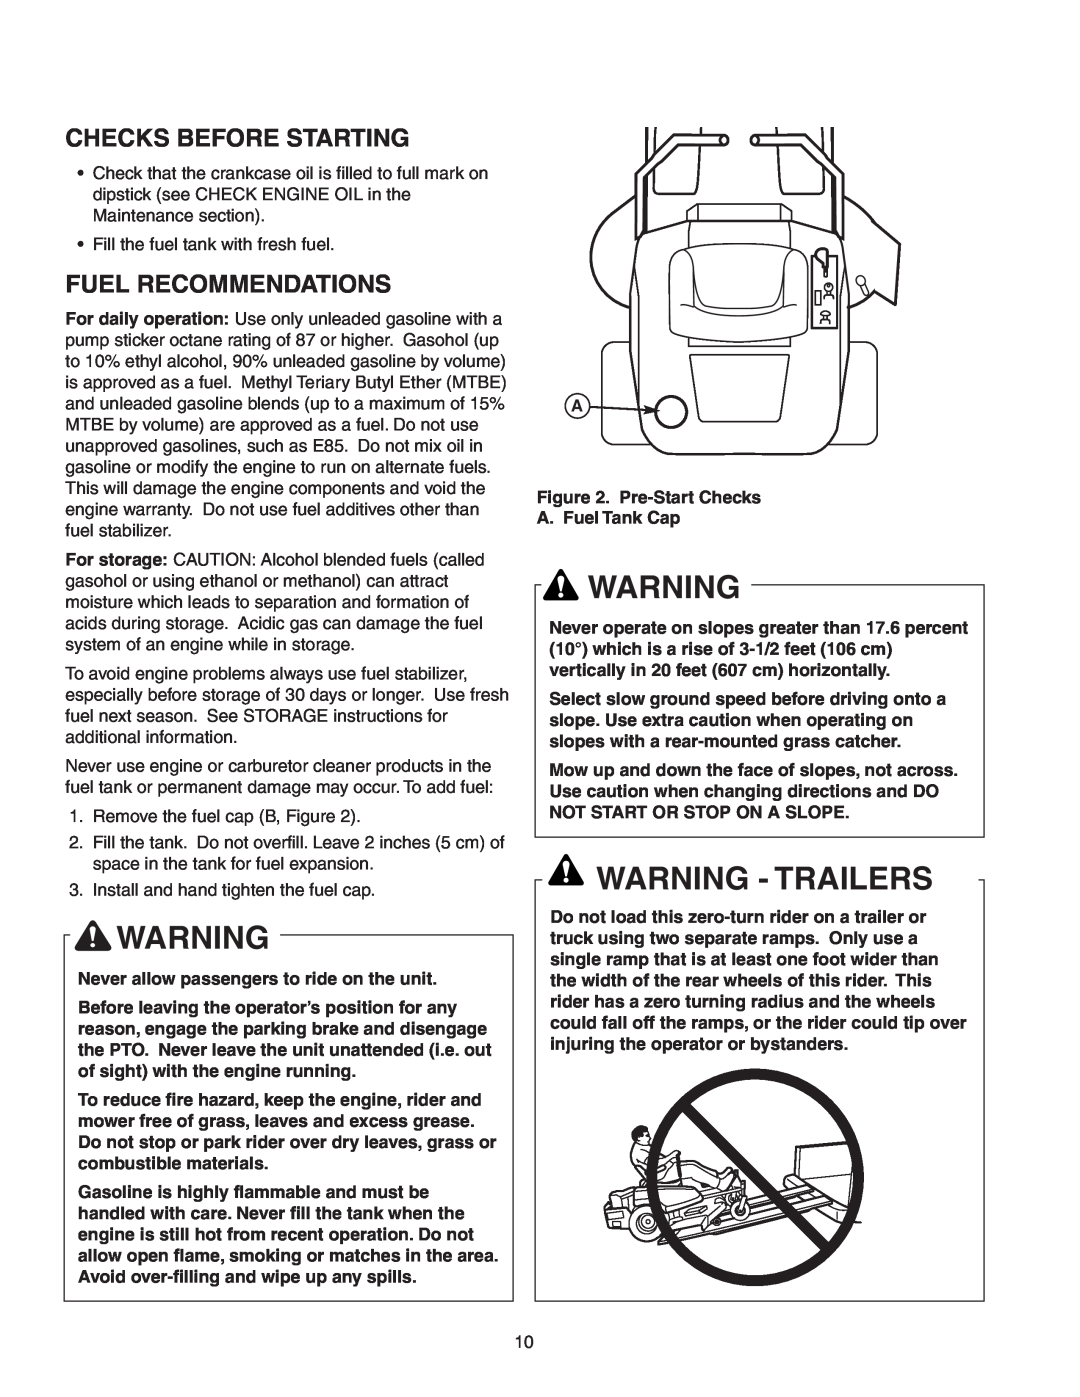 Snapper 150Z ZTR Series manual Warning - Trailers, Checks Before Starting, Fuel Recommendations 